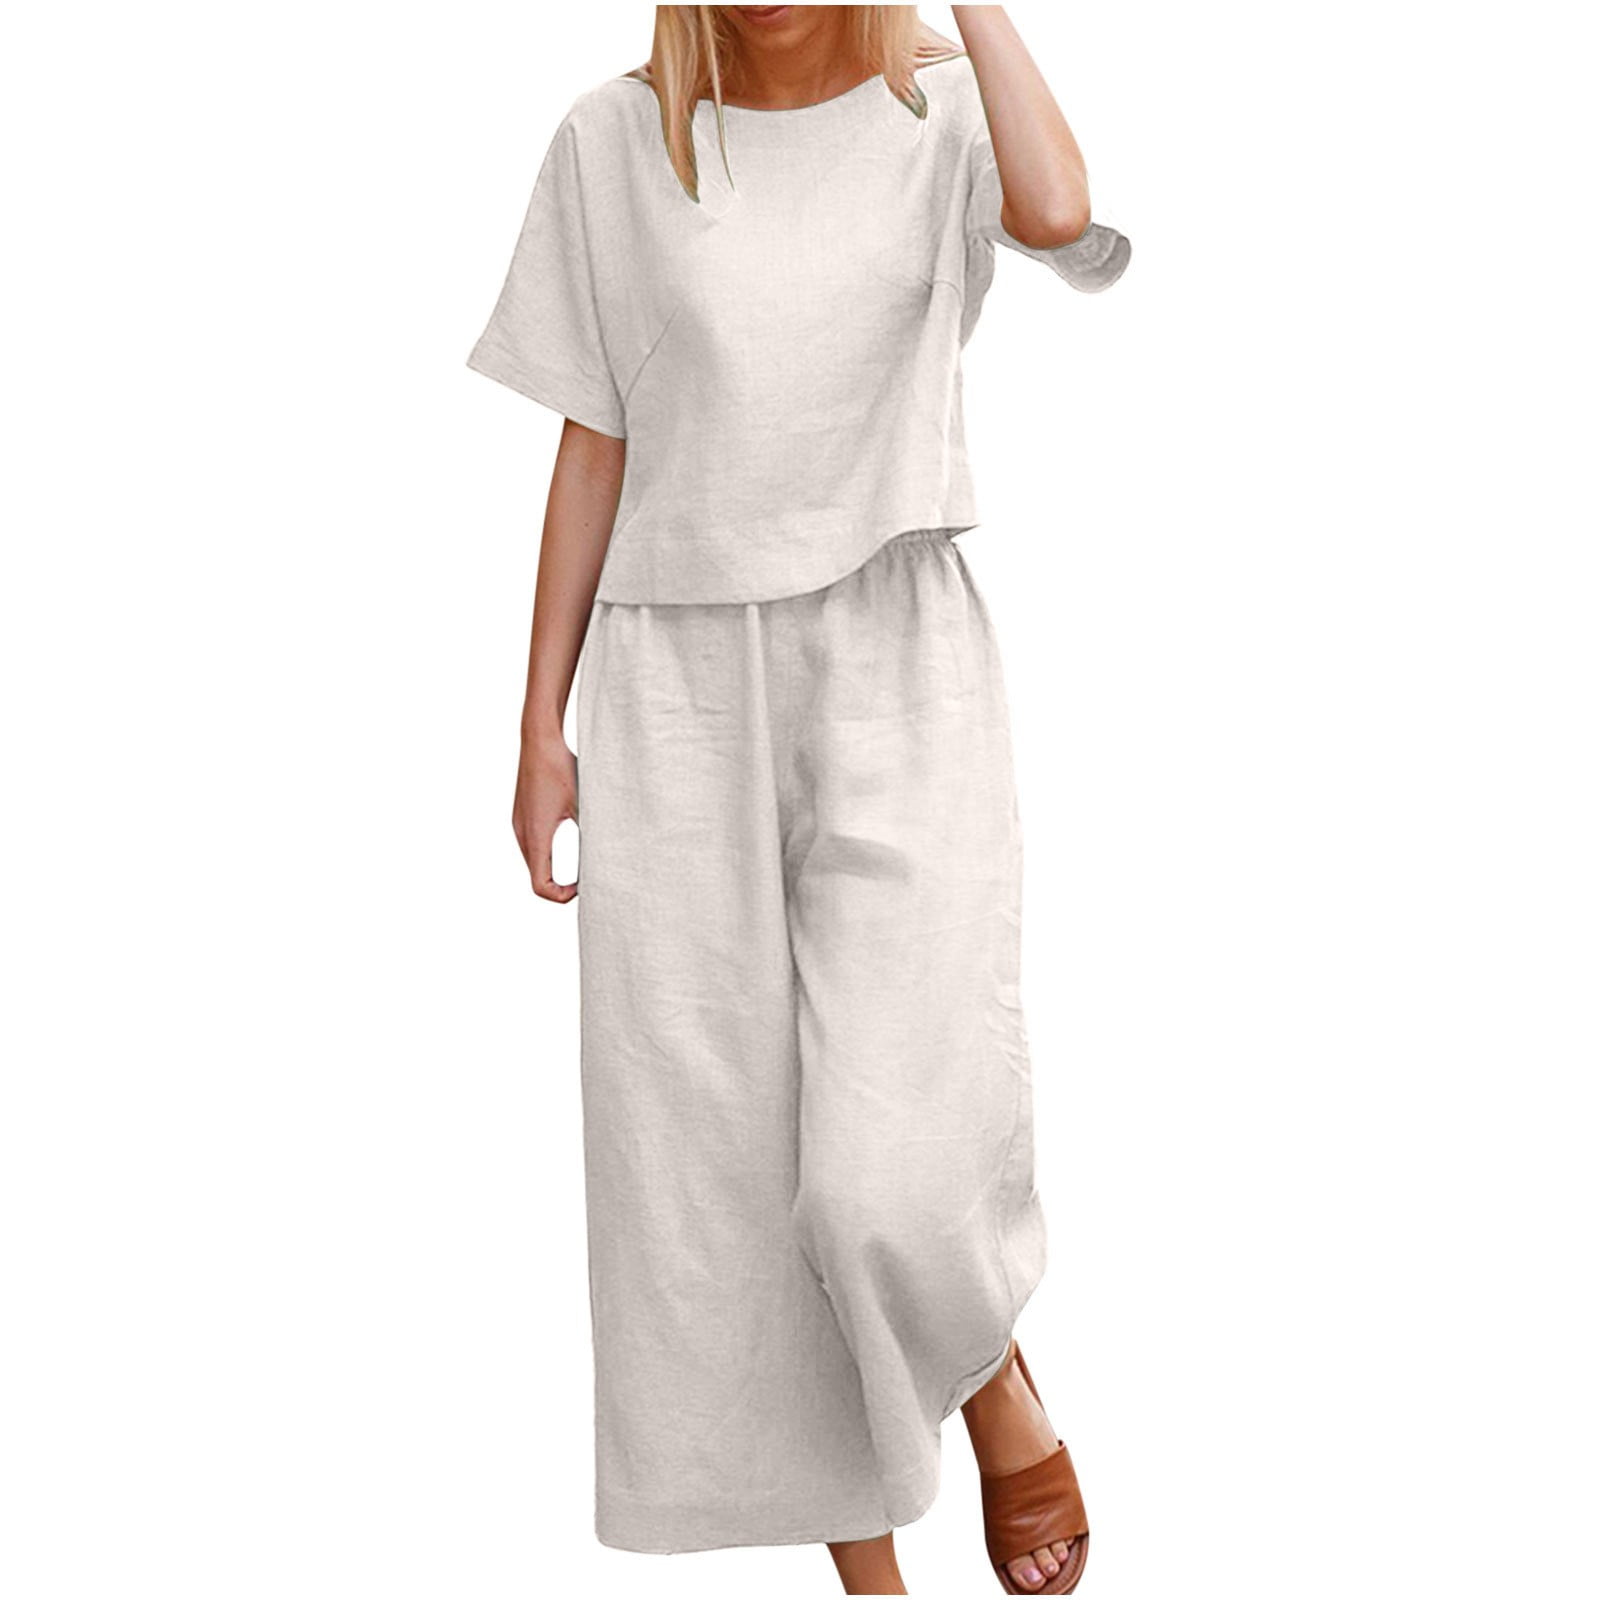 QUYUON Summer 2 Piece Outfits for Women Linen Set Casual Loose Crew Neck  Short Sleeve Tops High Waisted Cropped Wide Leg Pants Sets Two Piece  Matching Outfits Loungewear Style TW-36 White-B XL 